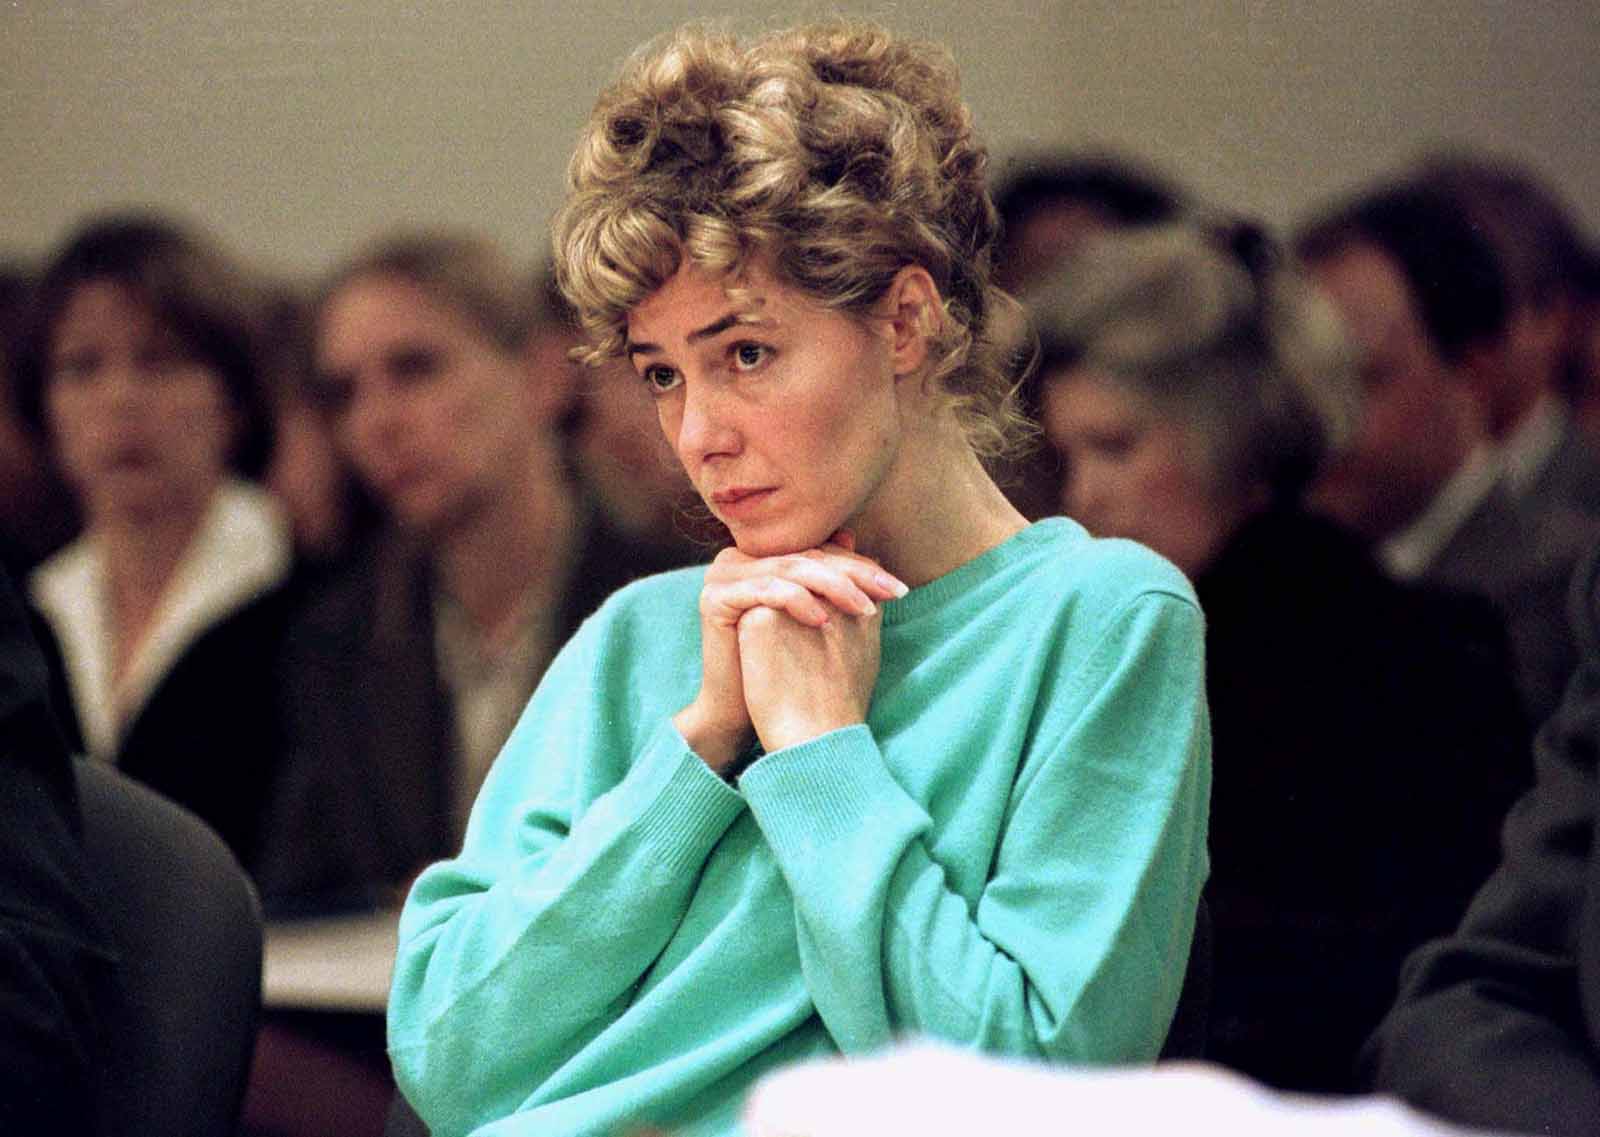 Most affairs don't end in arrest, but for Mary Kay Letourneau, it led to seven years in jail. Relive the former teacher's criminal story.